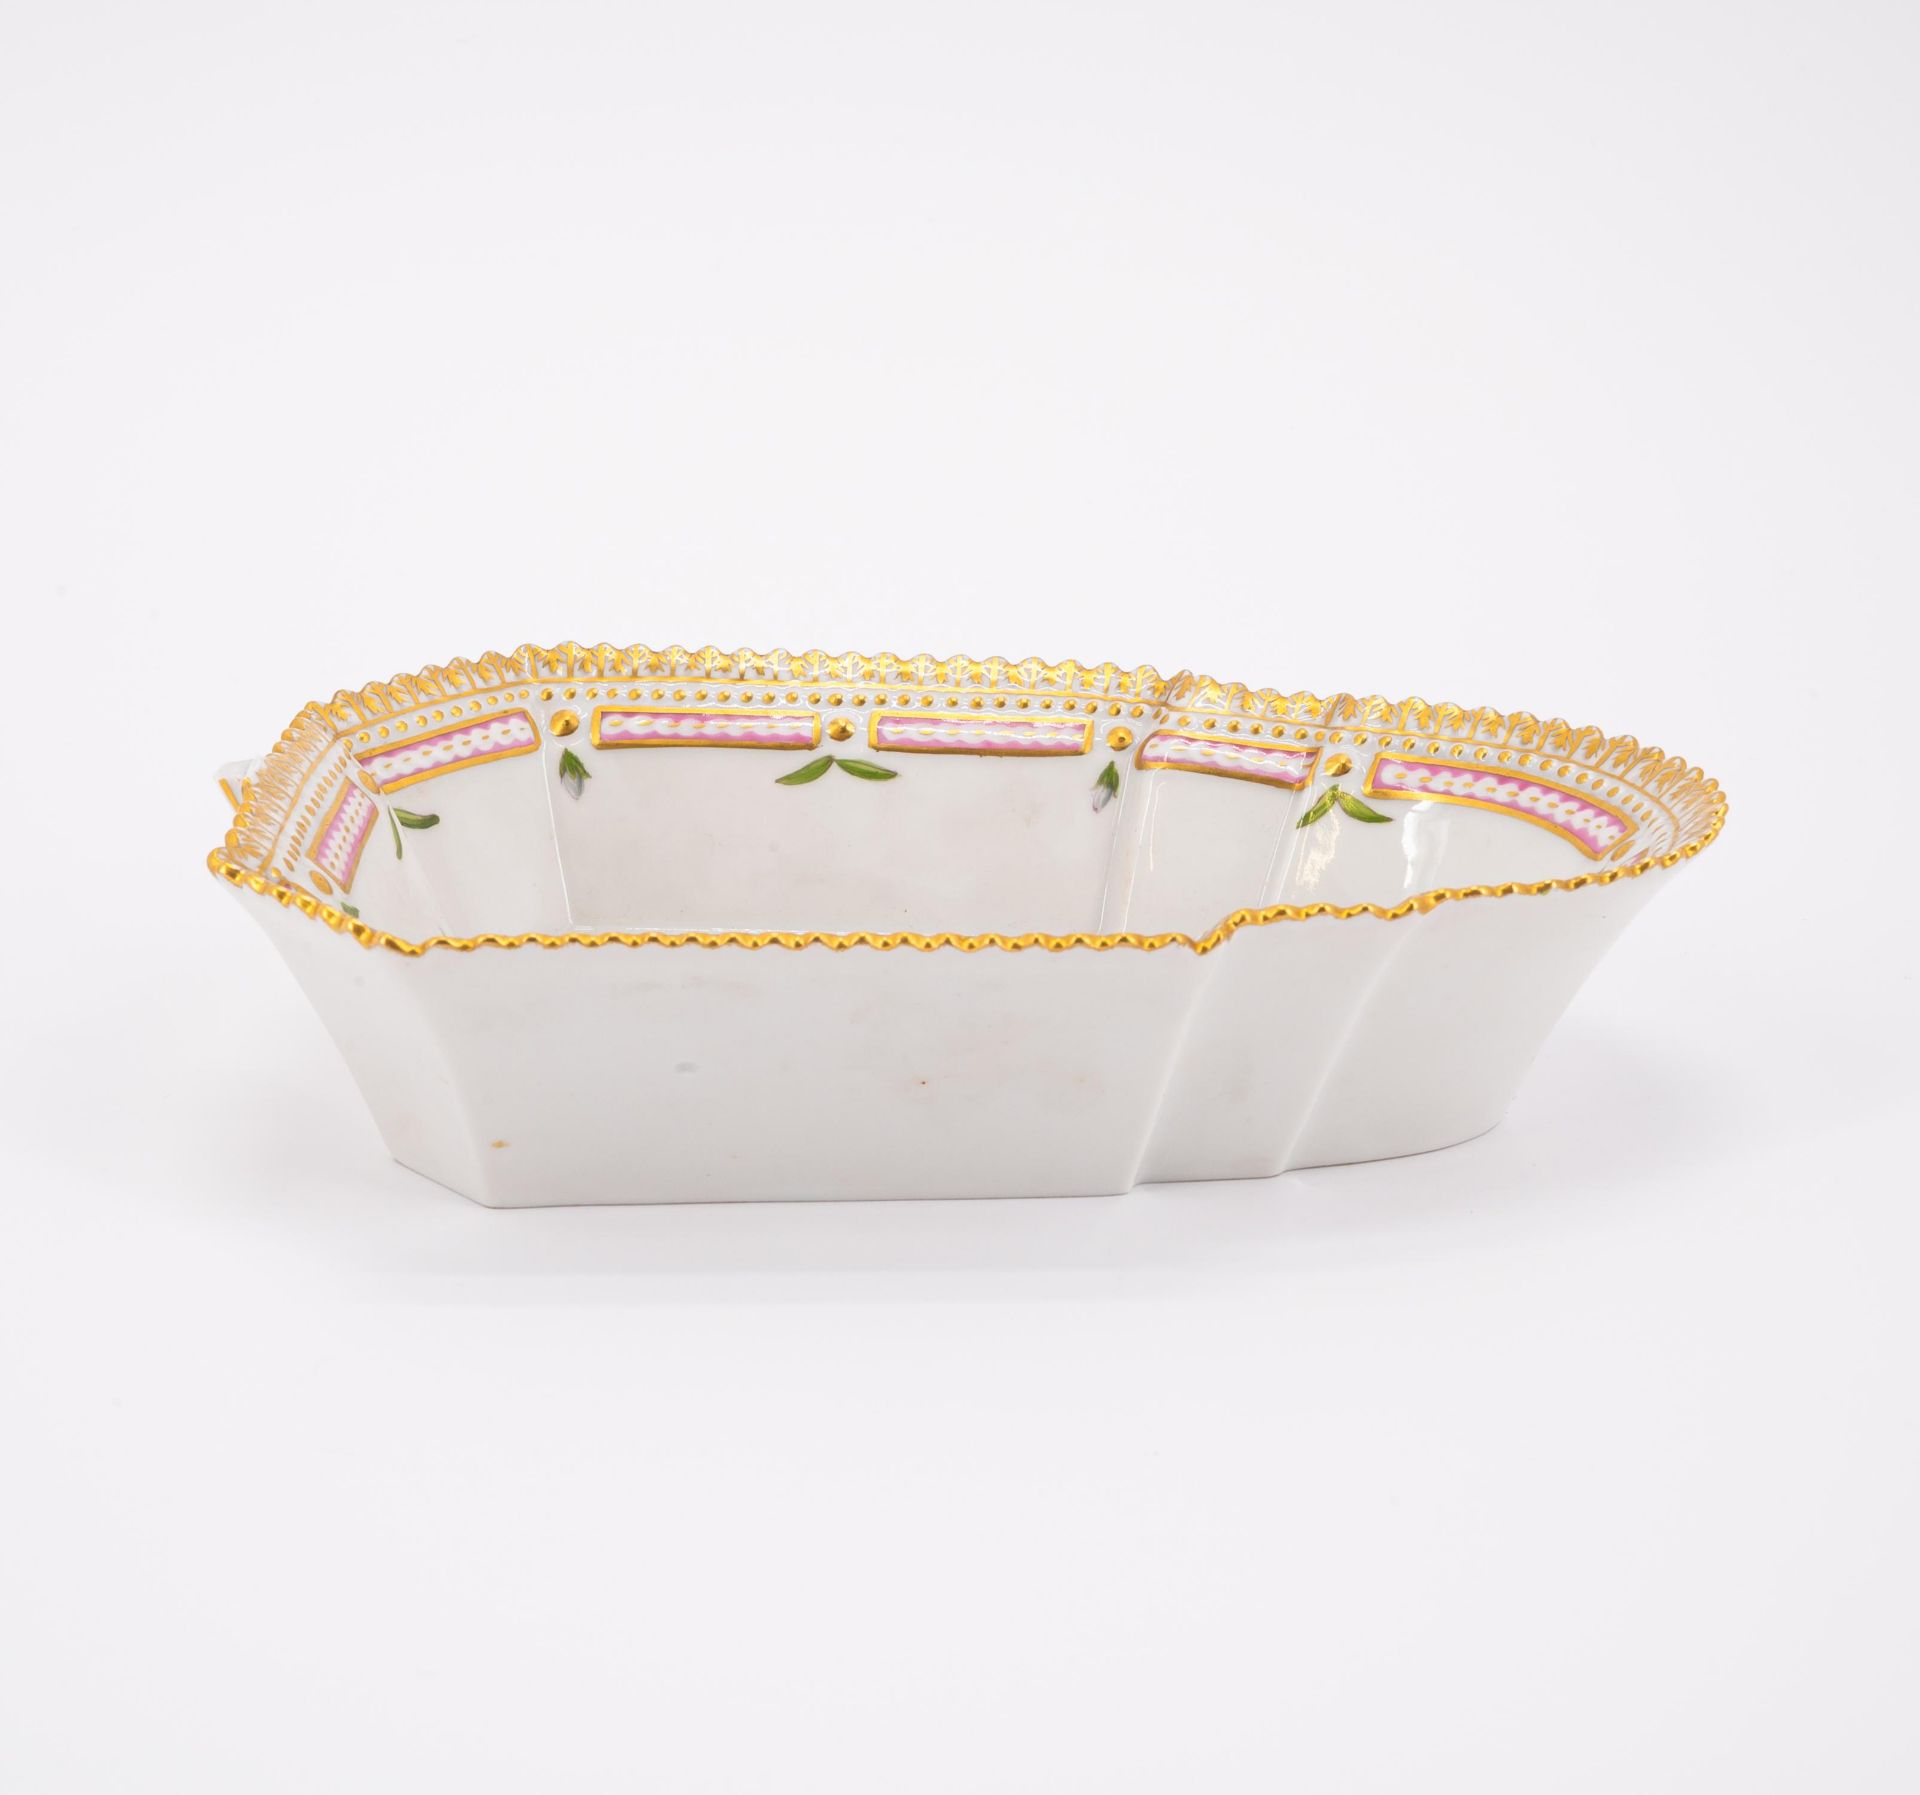 Royal Copenhagen: 95 PIECES FROM A 'FLORA DANICA' DINING SERVICE - Image 7 of 26